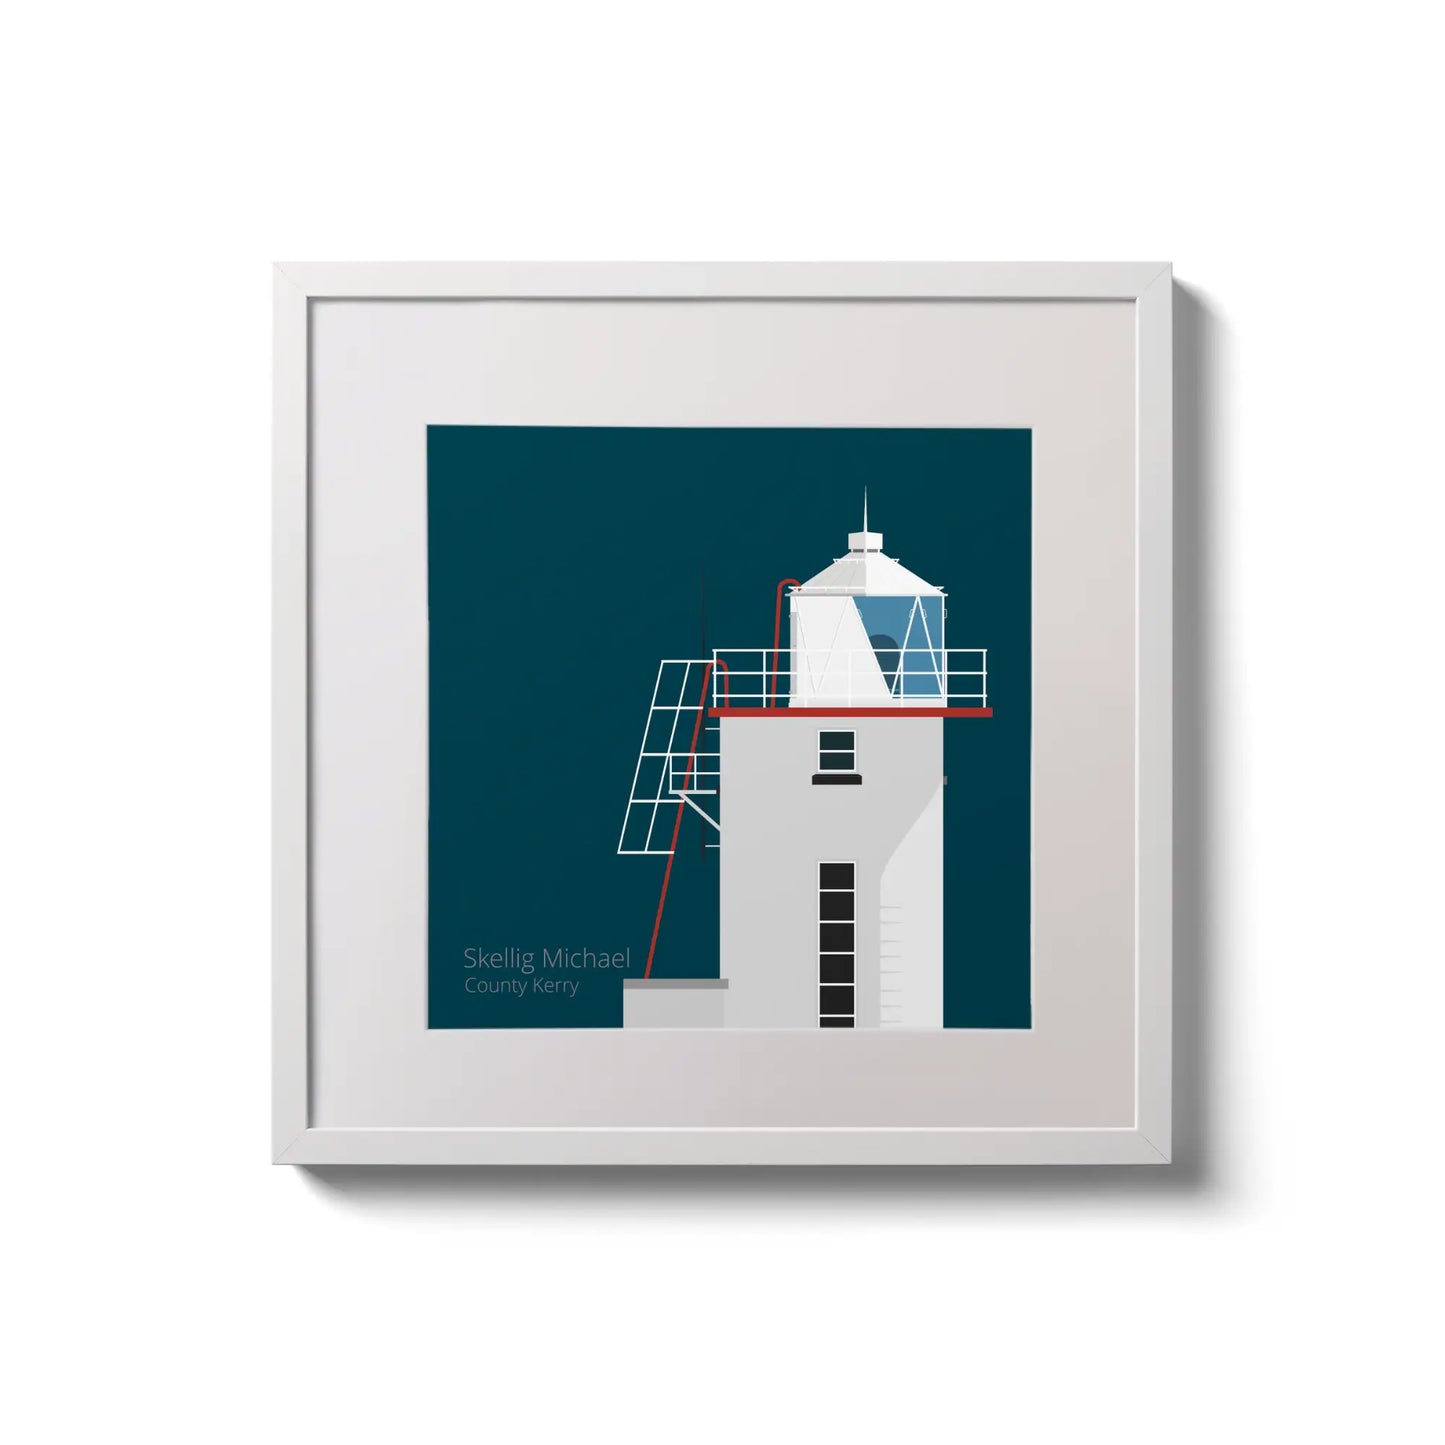 Illustration of Skellig Michael lighthouse on a midnight blue background,  in a white square frame measuring 20x20cm.